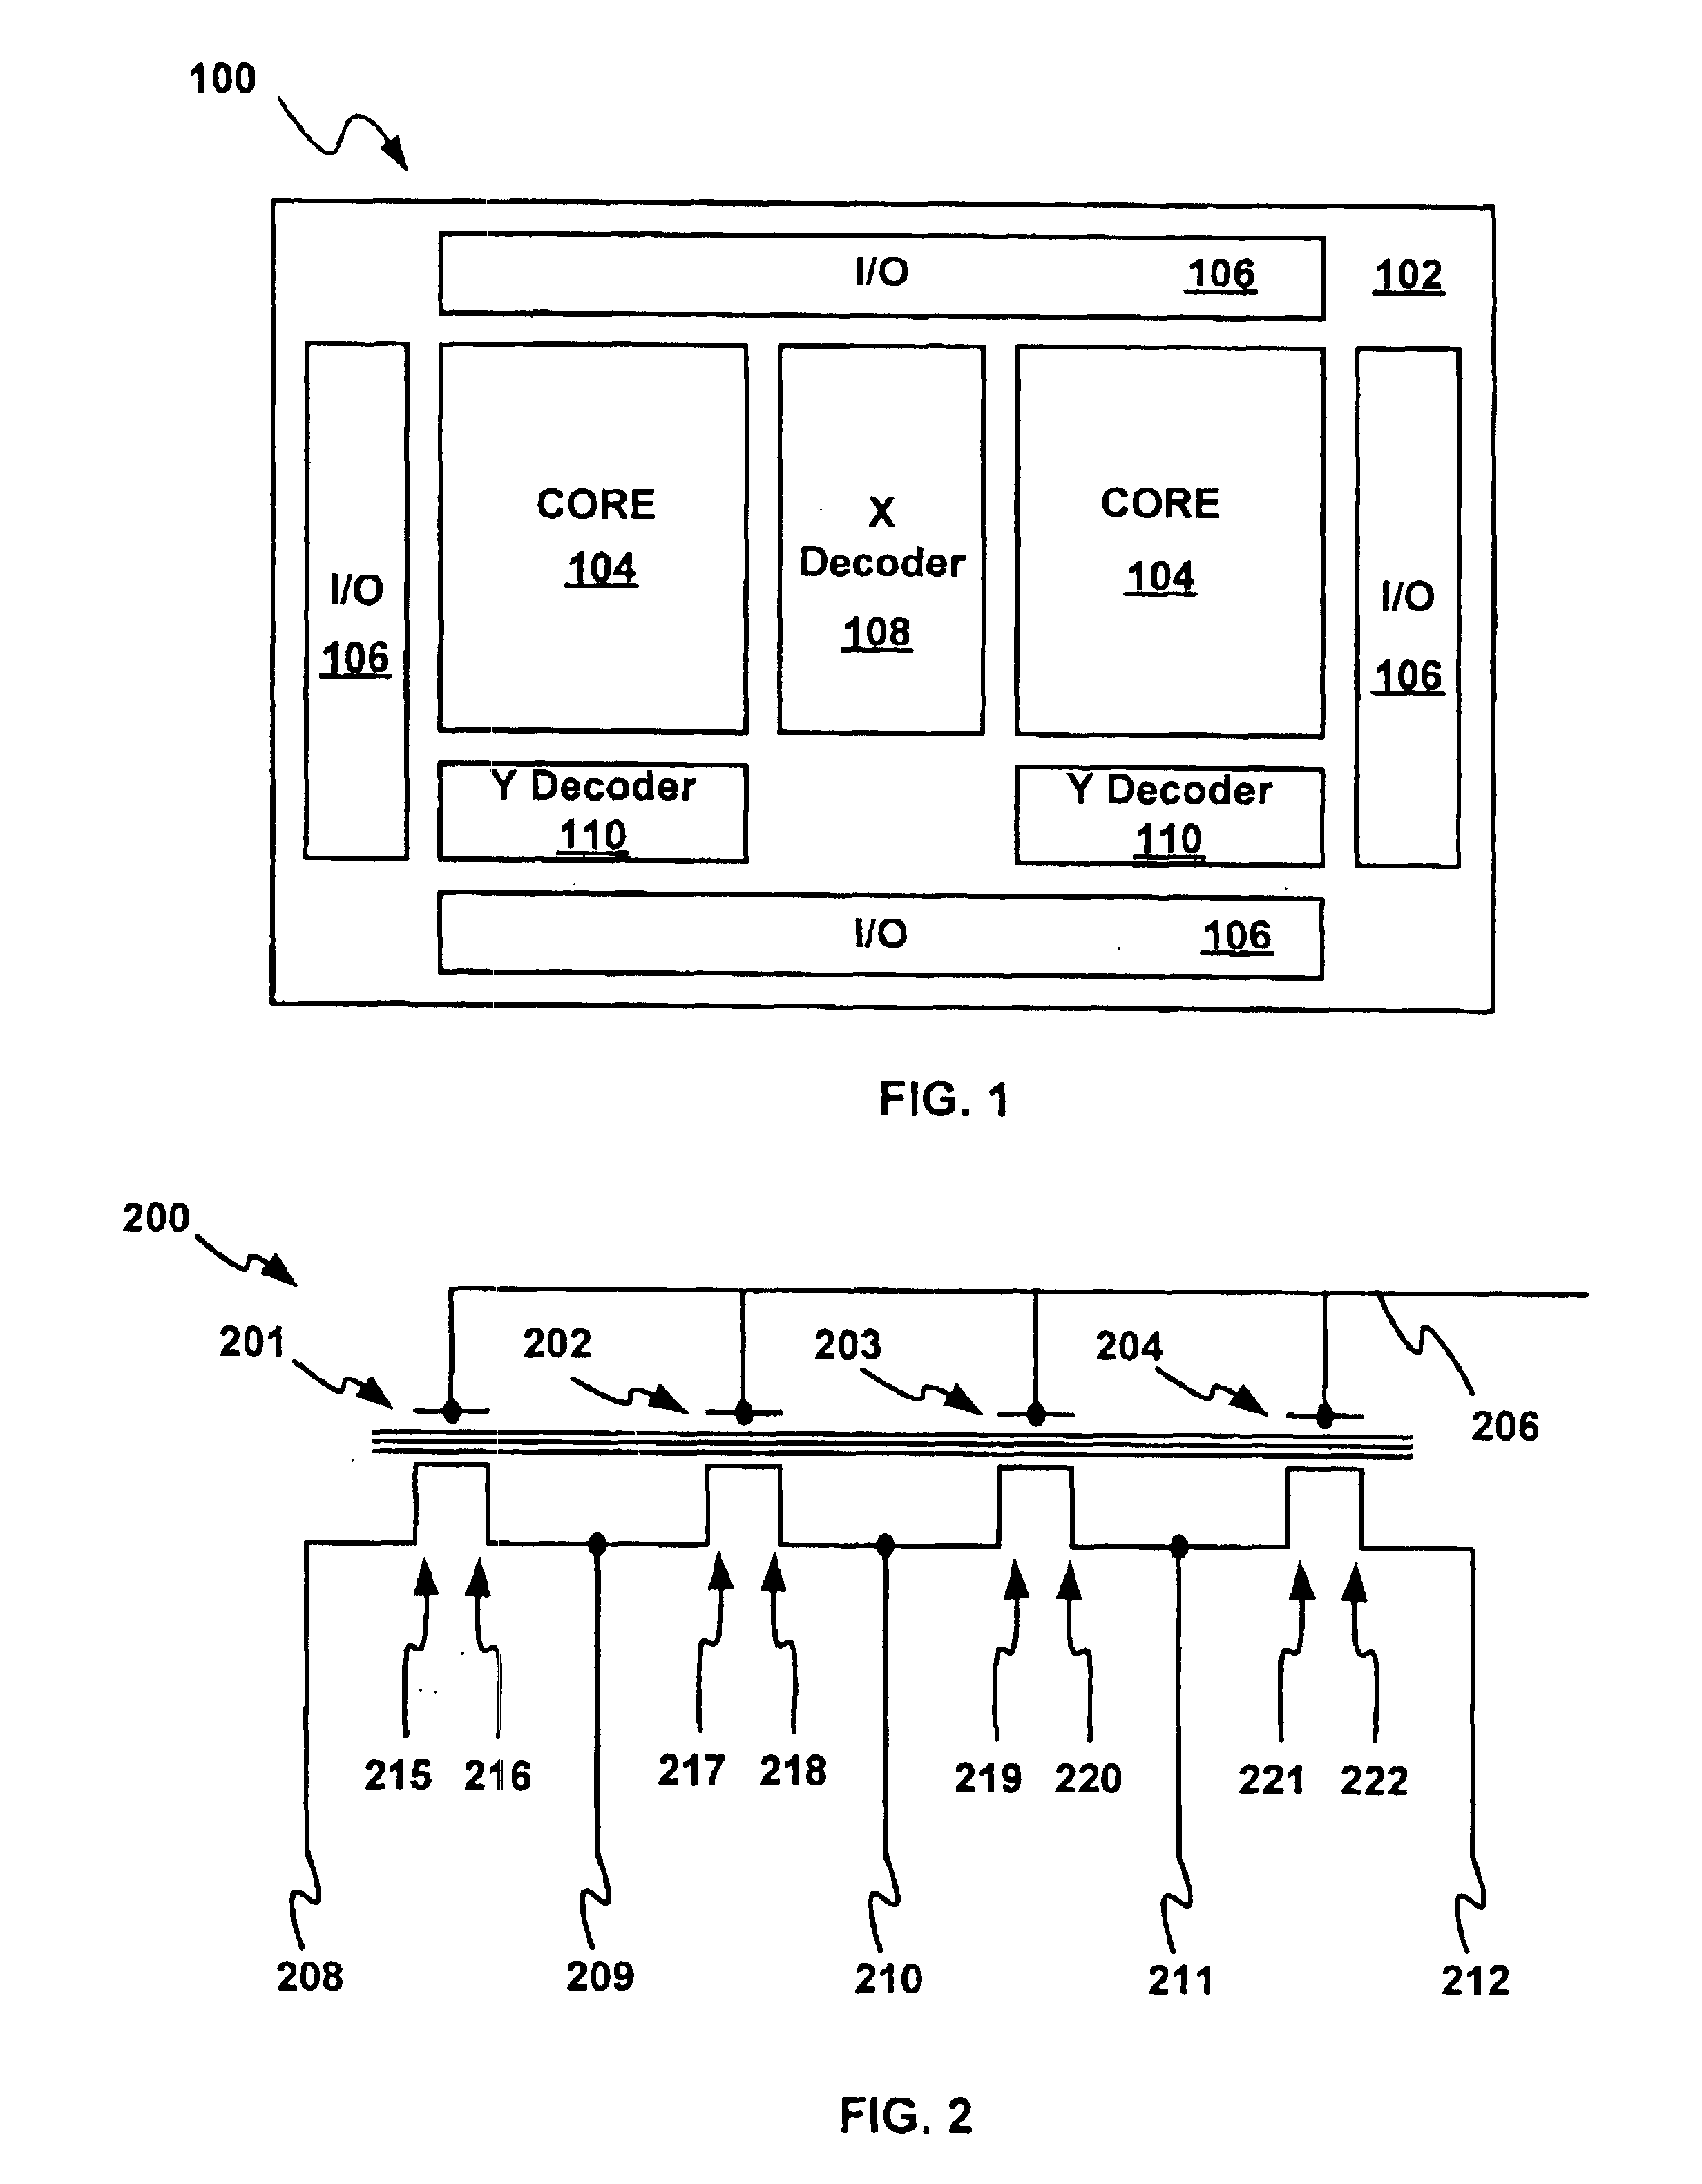 Method of manufacturing a semiconductor memory with deuterated materials